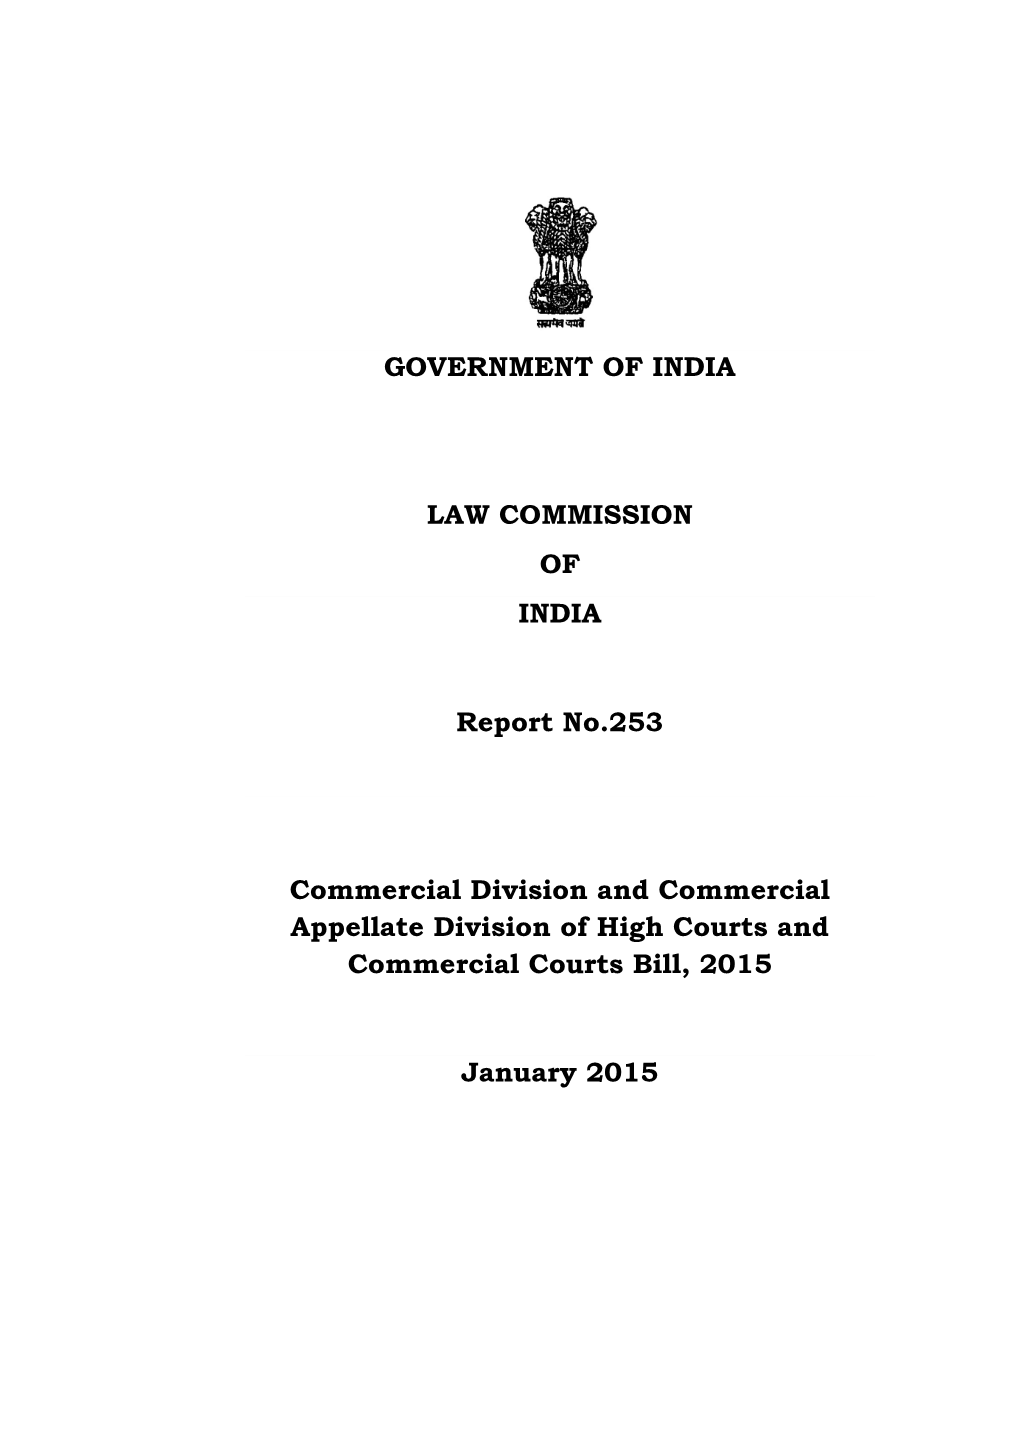 Report No.253 Commercial Division and Commercial Appellate Division of High Courts and Commercial Courts Bill, 2015